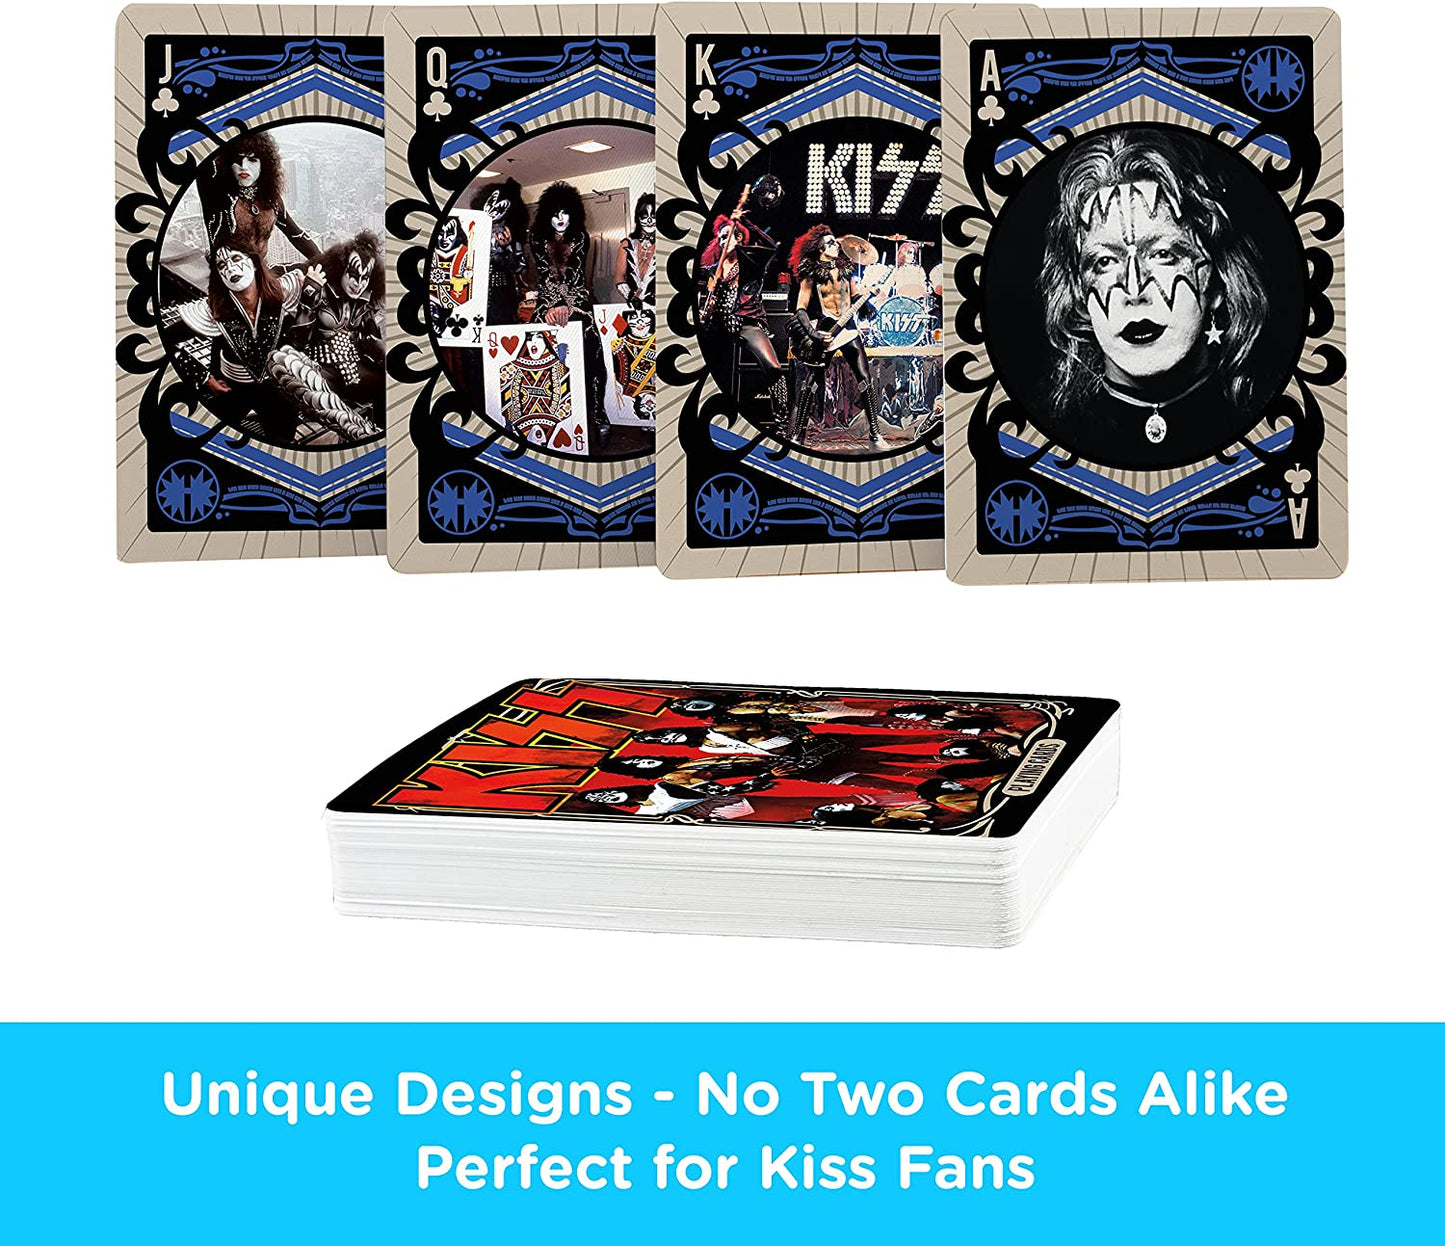 KISS card game - Pictures